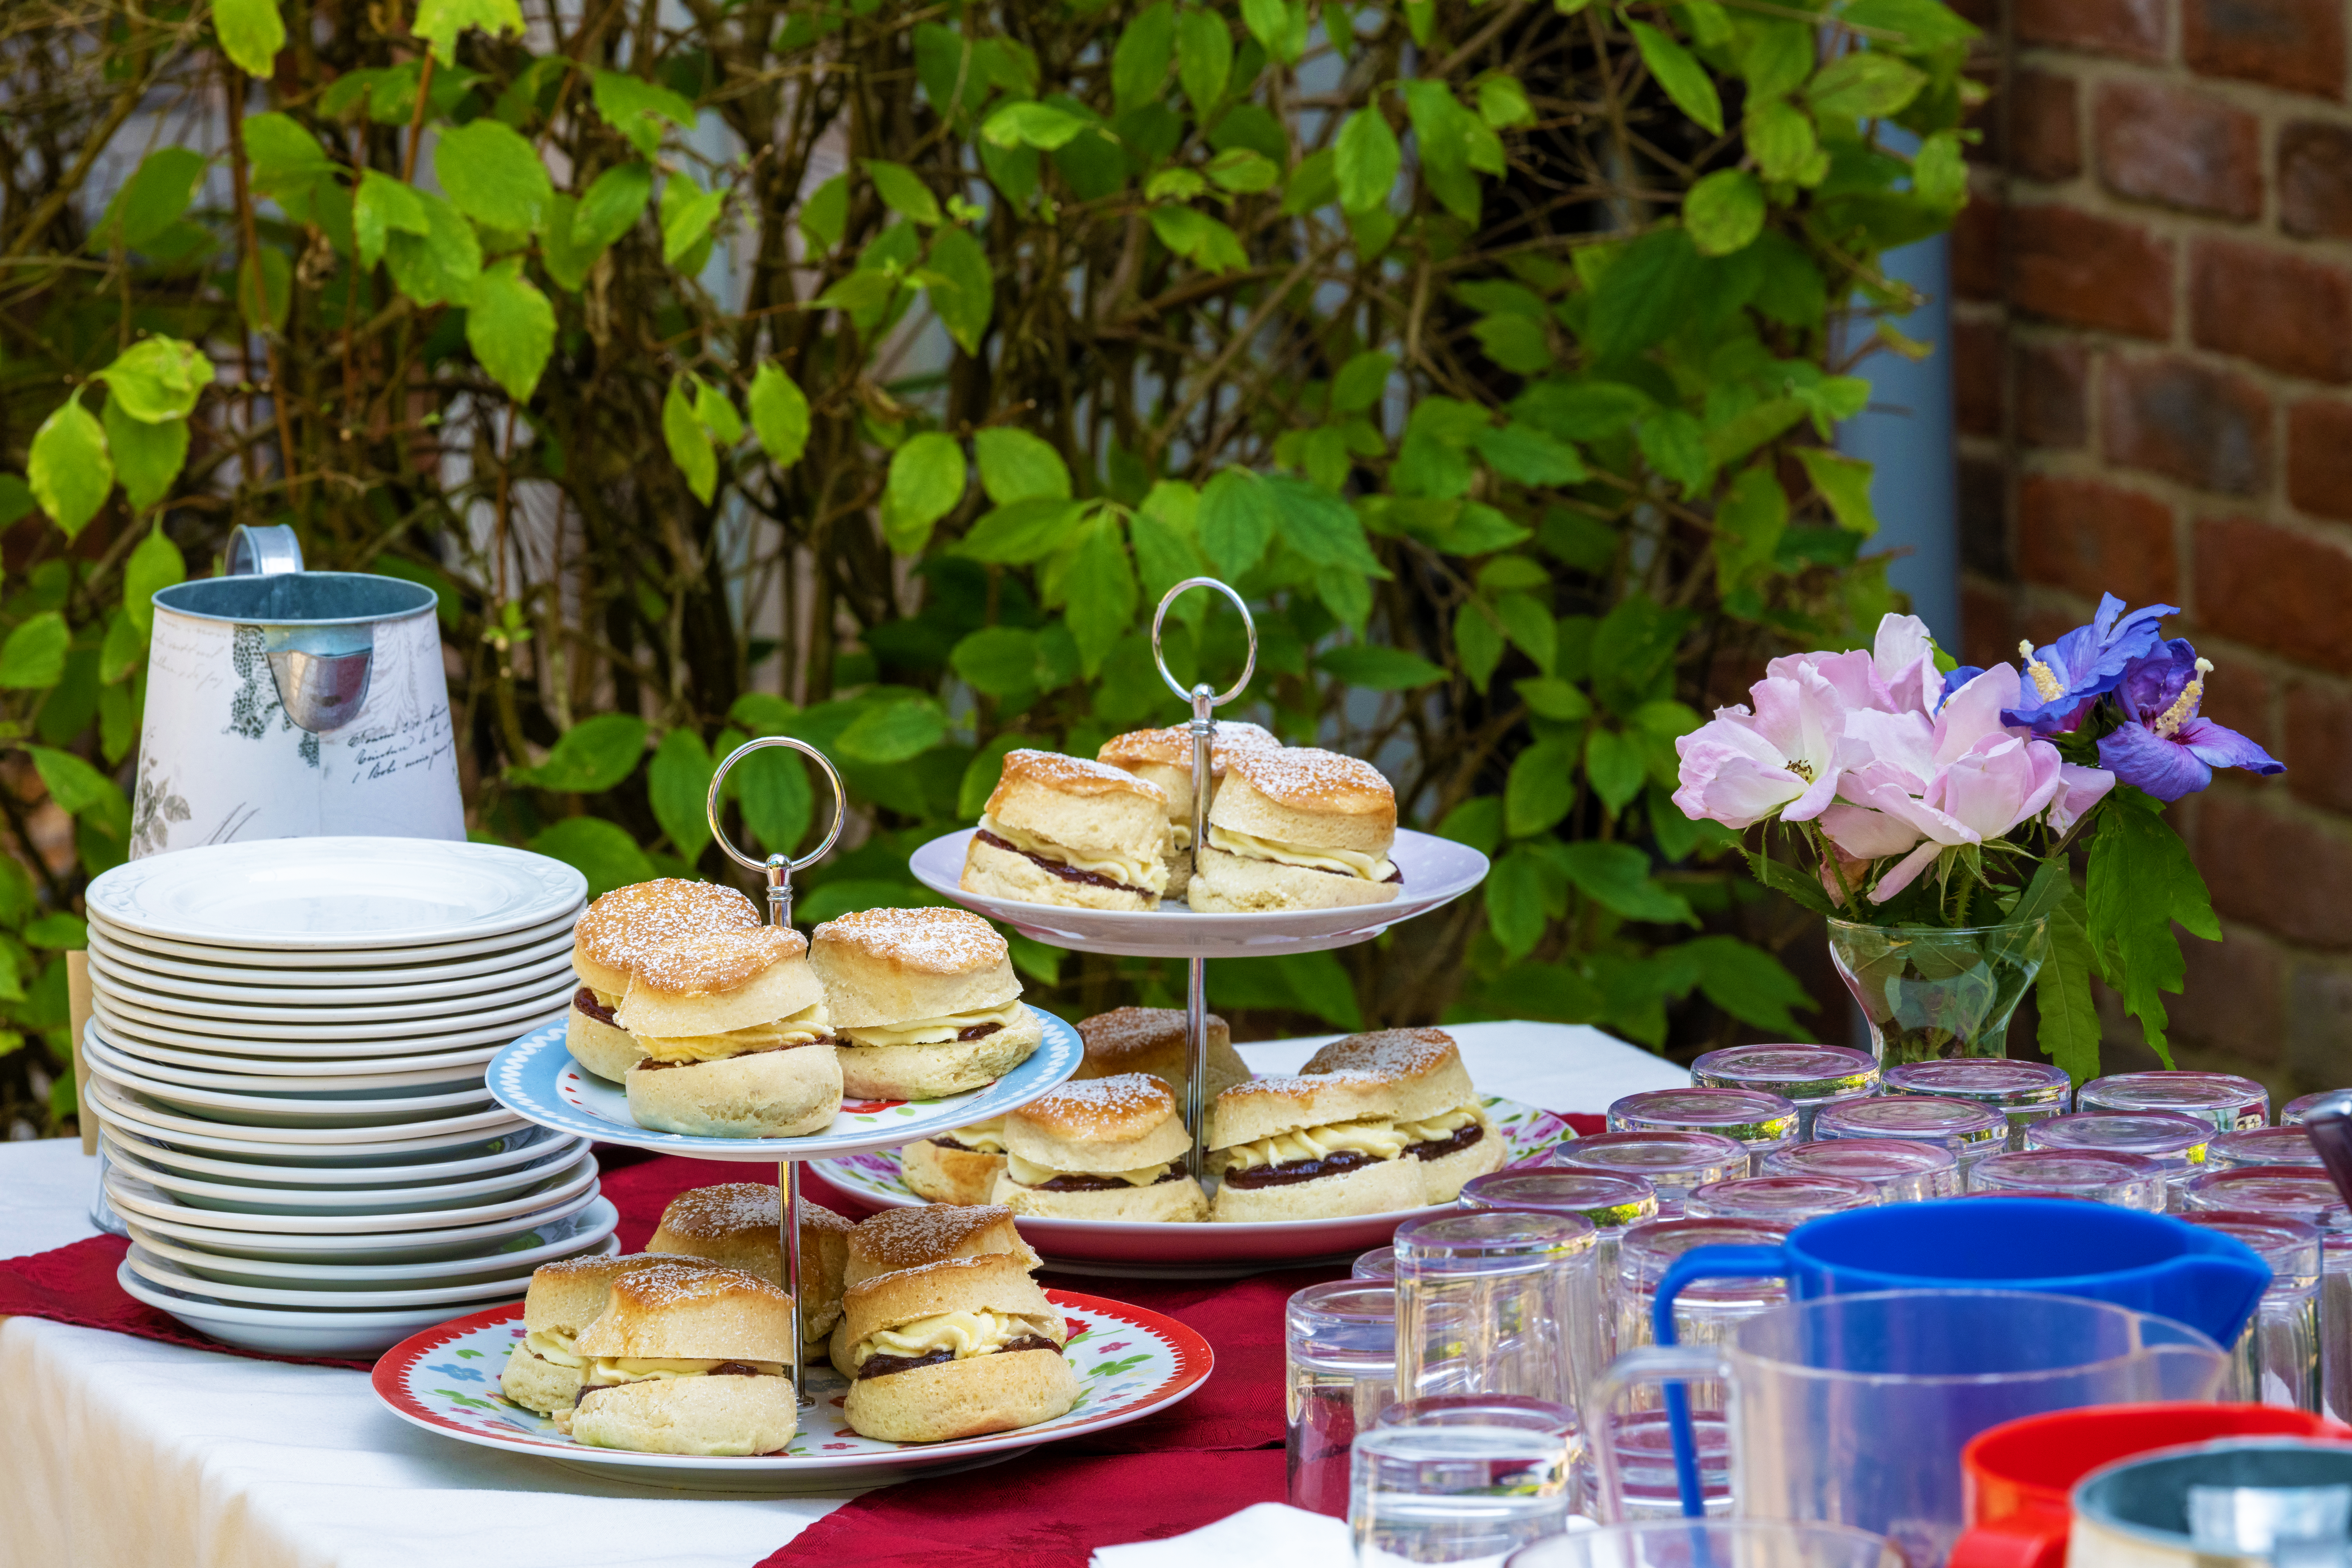 Knightwood afternoon tea in the garden